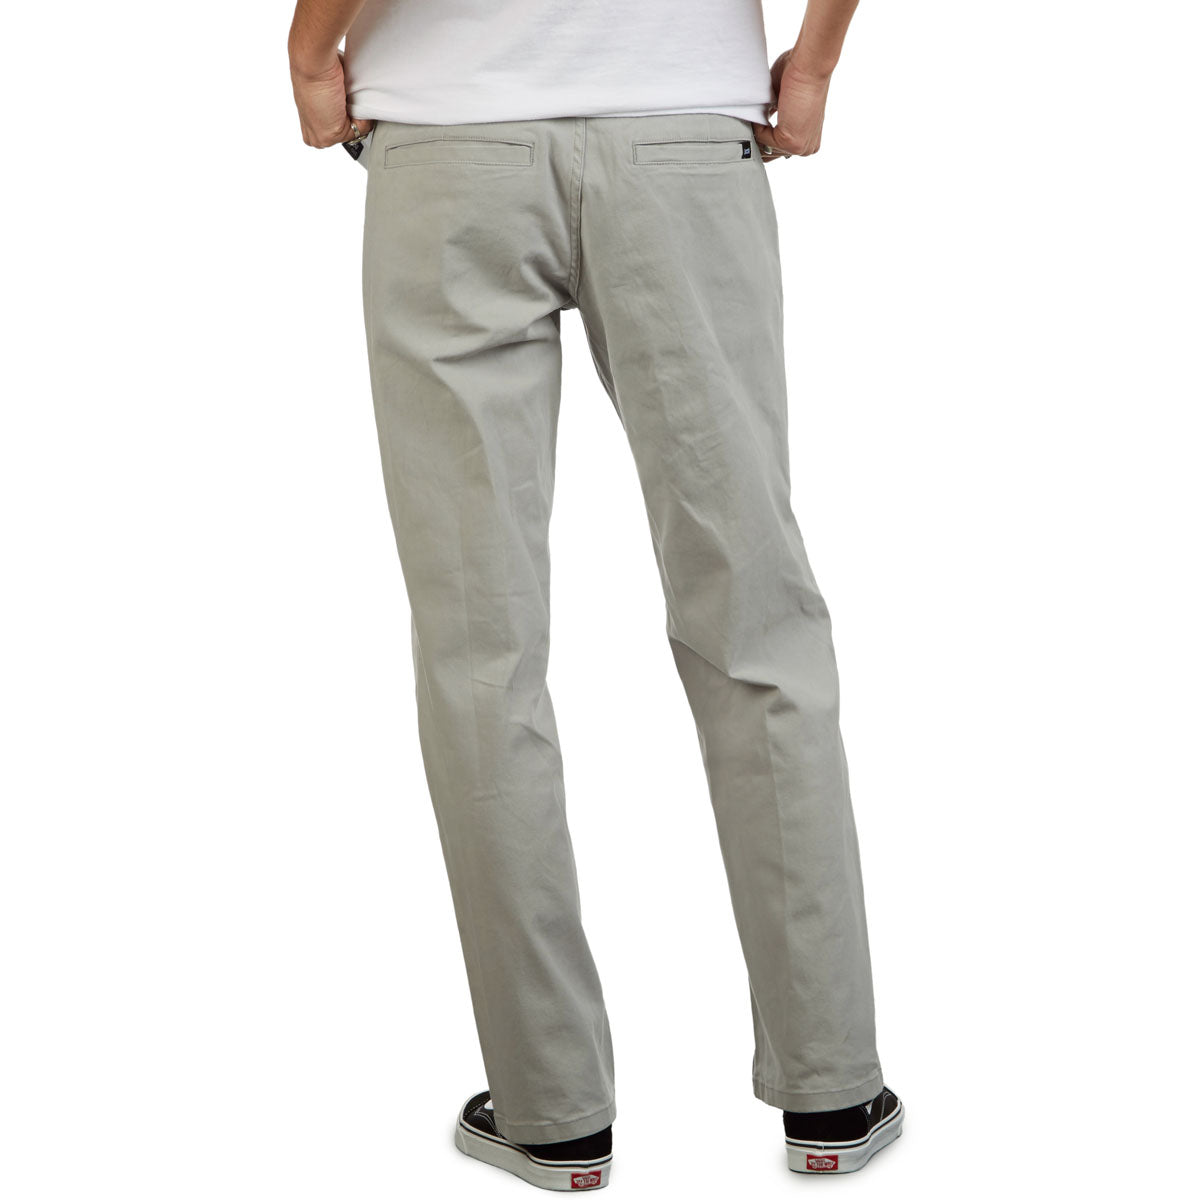 CCS Standard Plus Relaxed Chino Pants - Dove Grey image 3